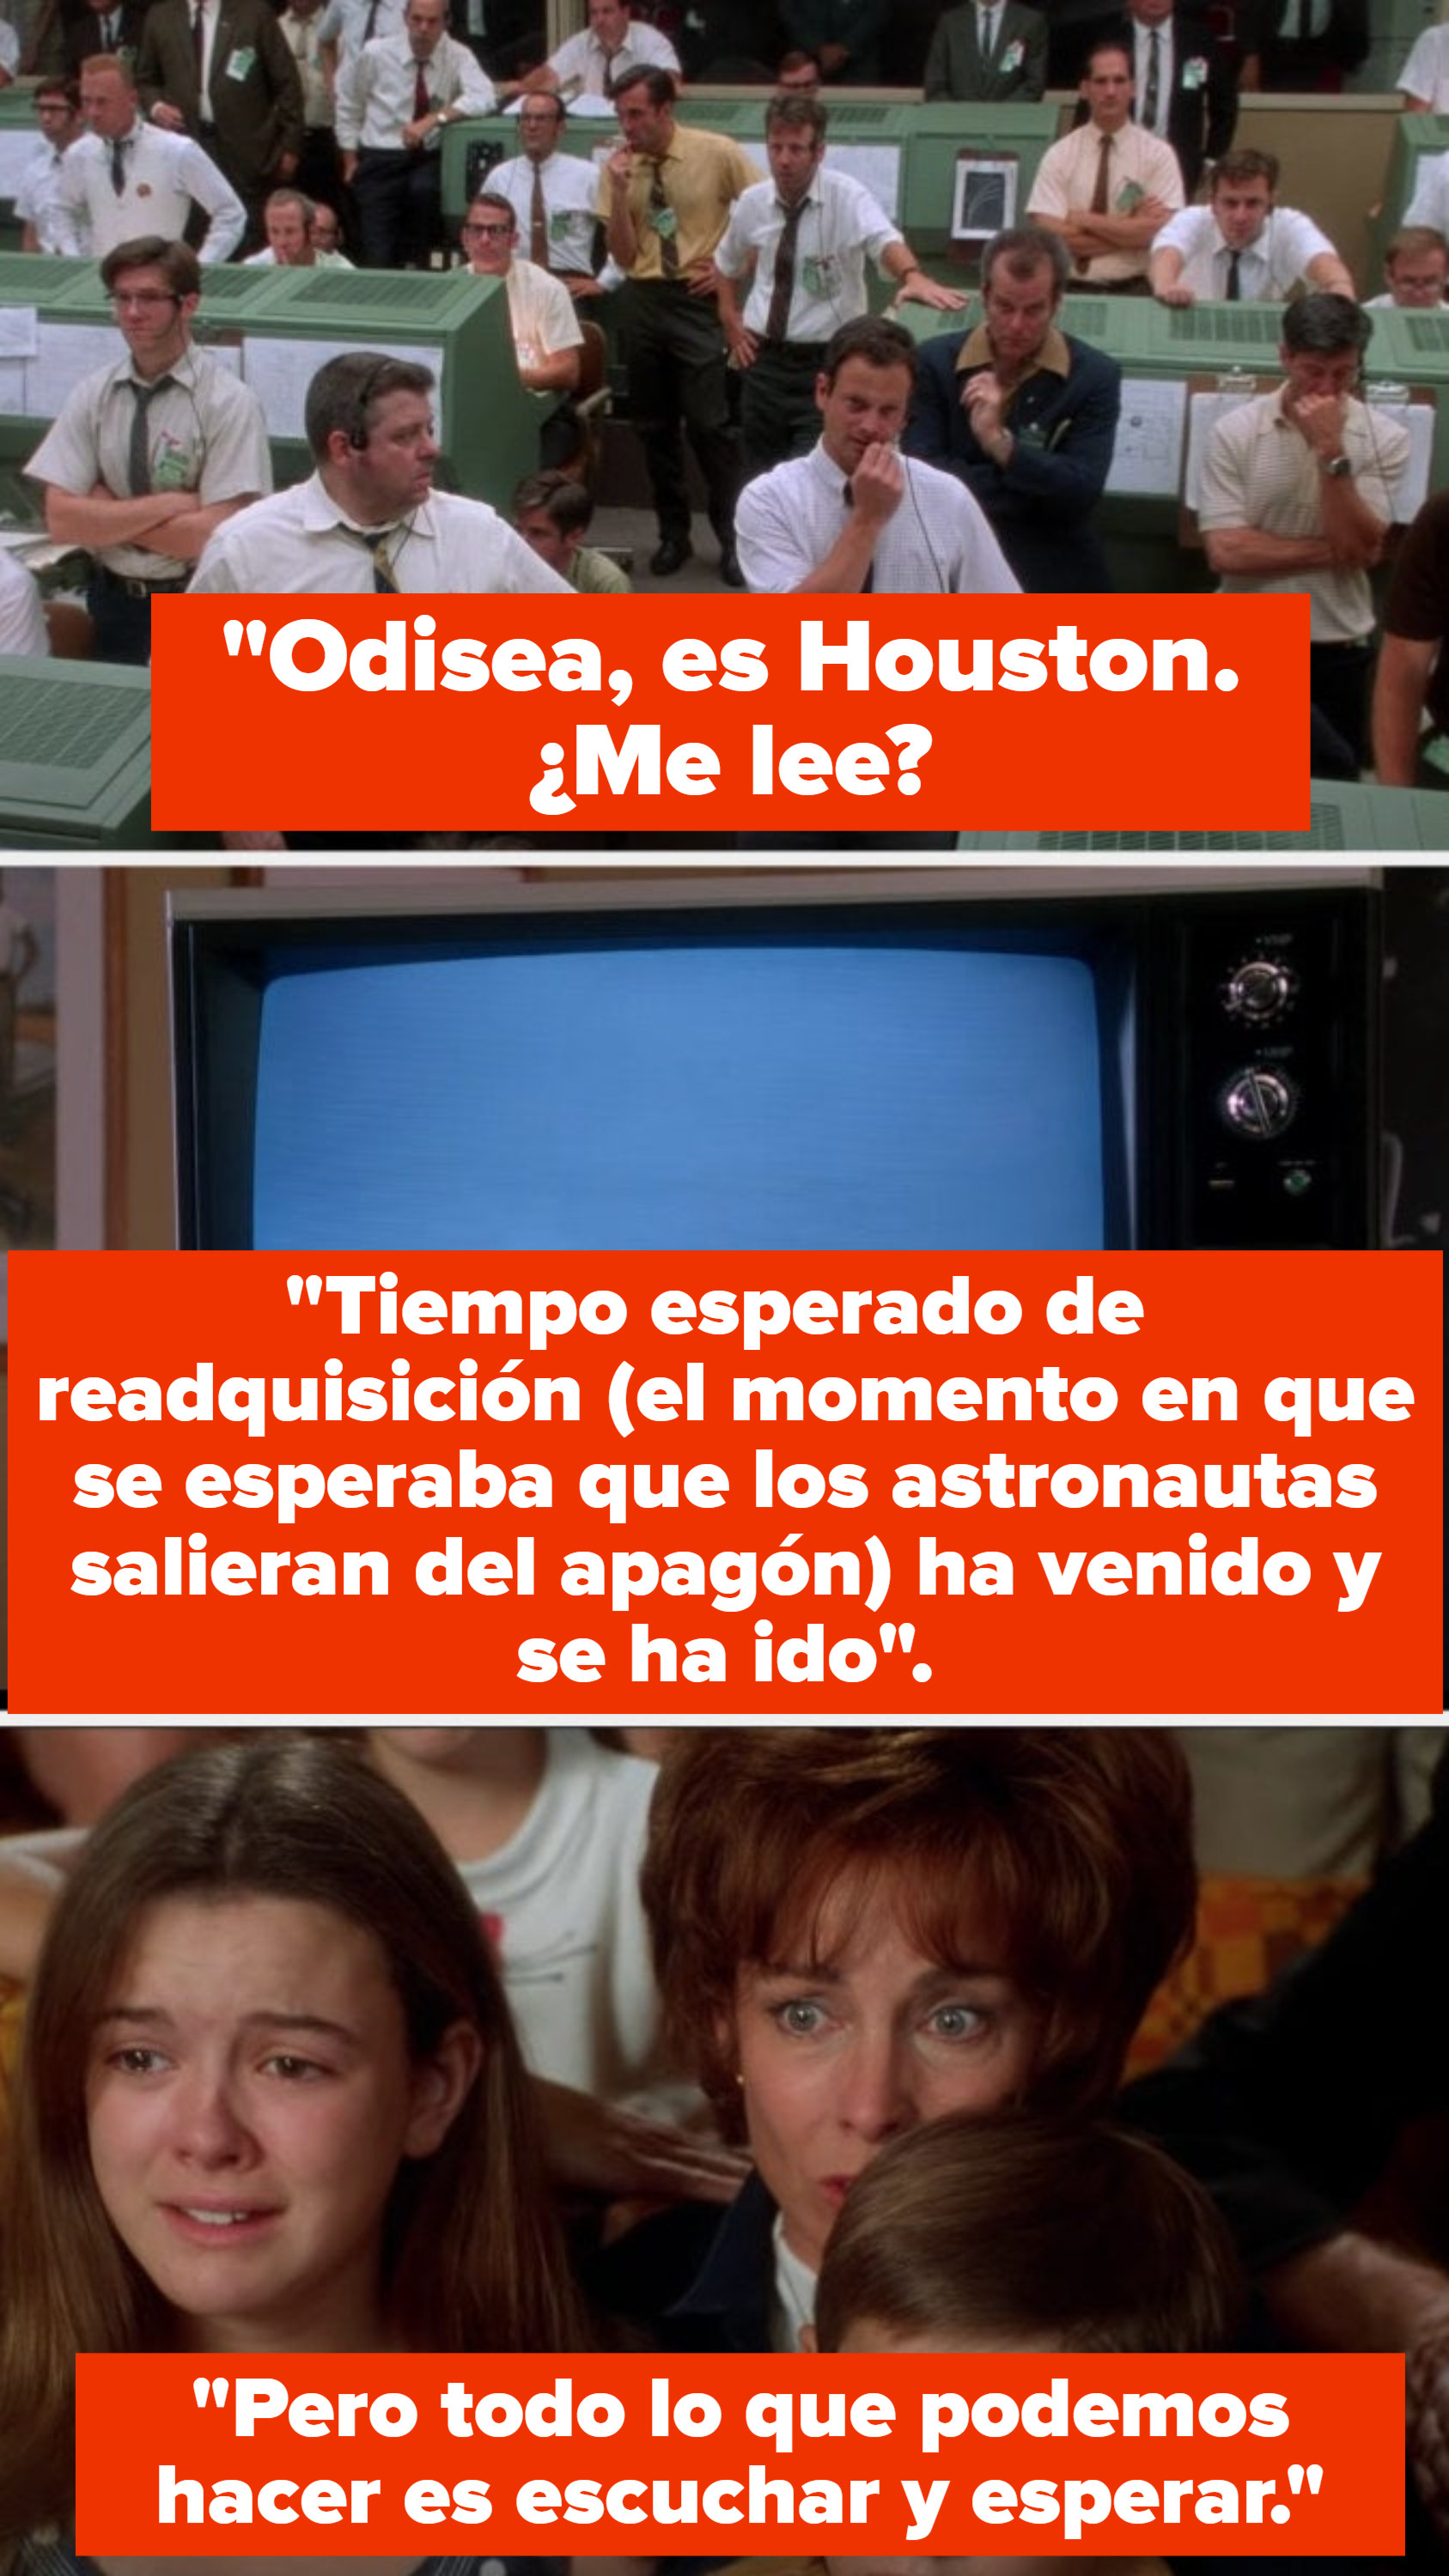 Houston tries to get ahold of Apollo 13 as people watch the news, and the newscaster says they should&#x27;ve made contact by now